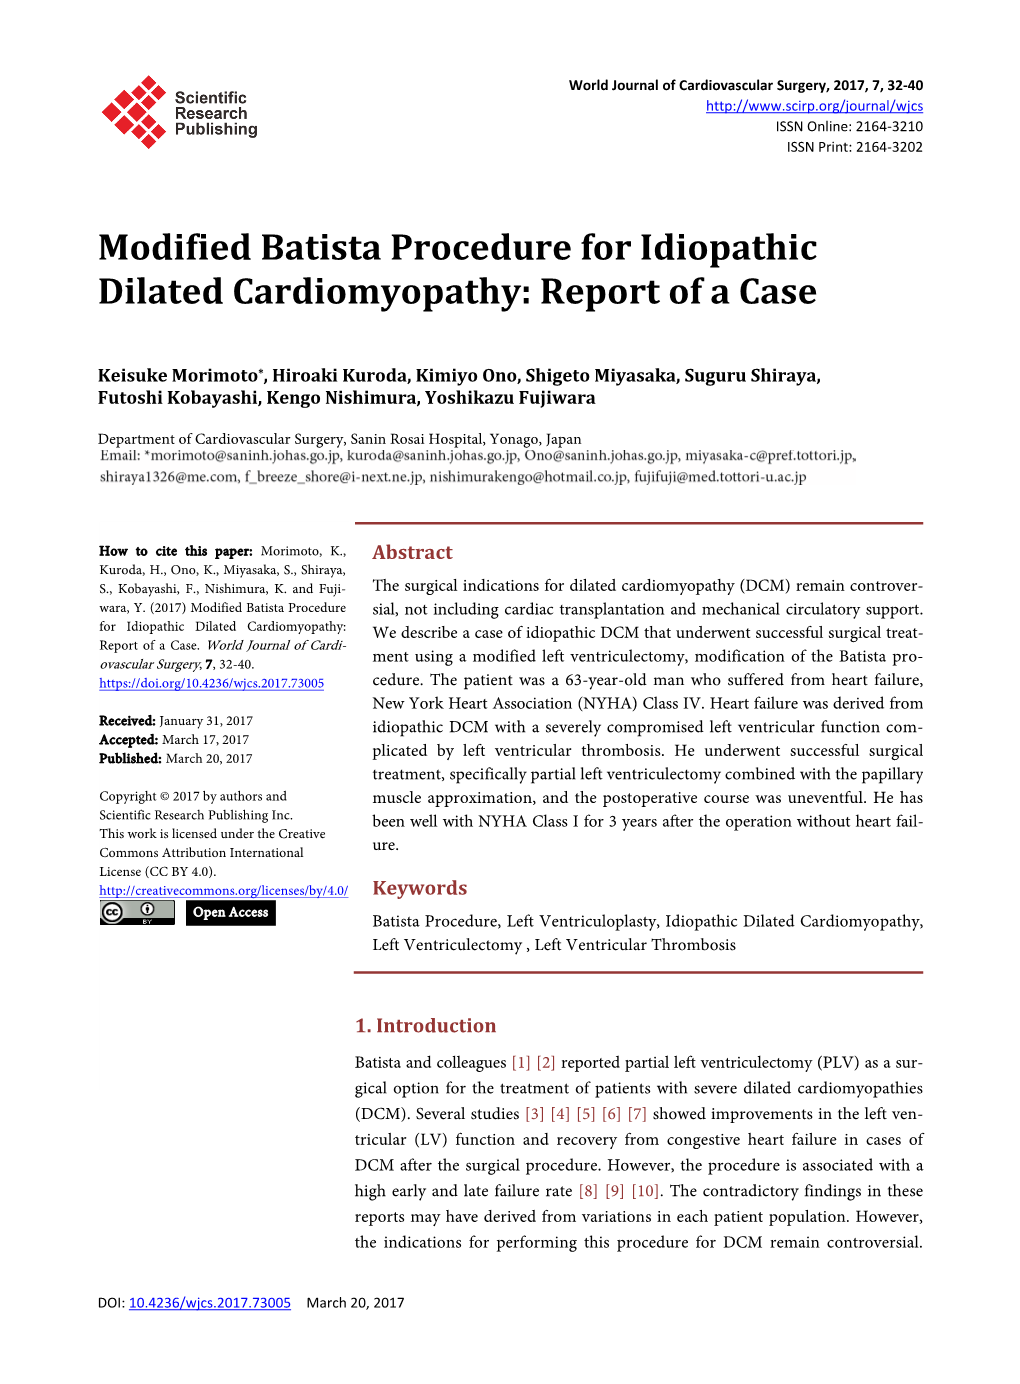 Modified Batista Procedure for Idiopathic Dilated Cardiomyopathy: Report of a Case